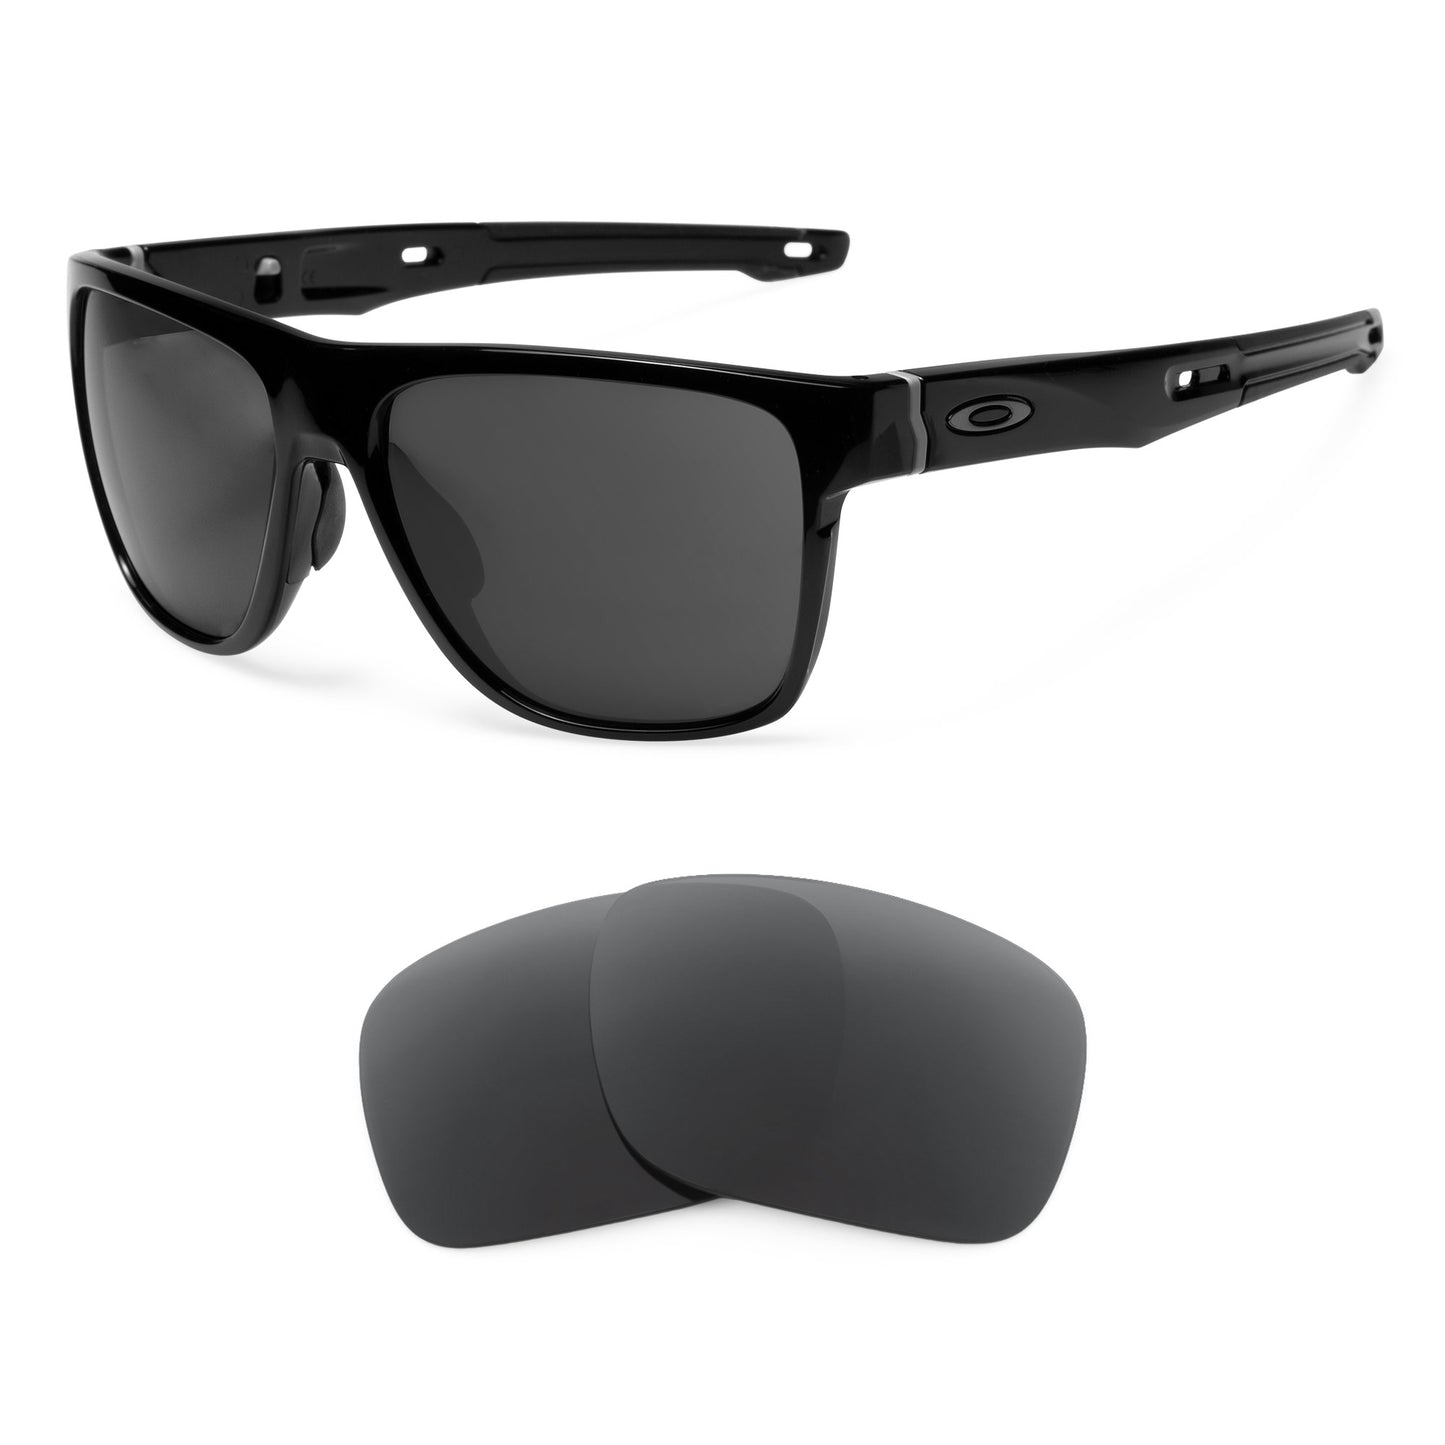 Oakley Crossrange XL sunglasses with replacement lenses